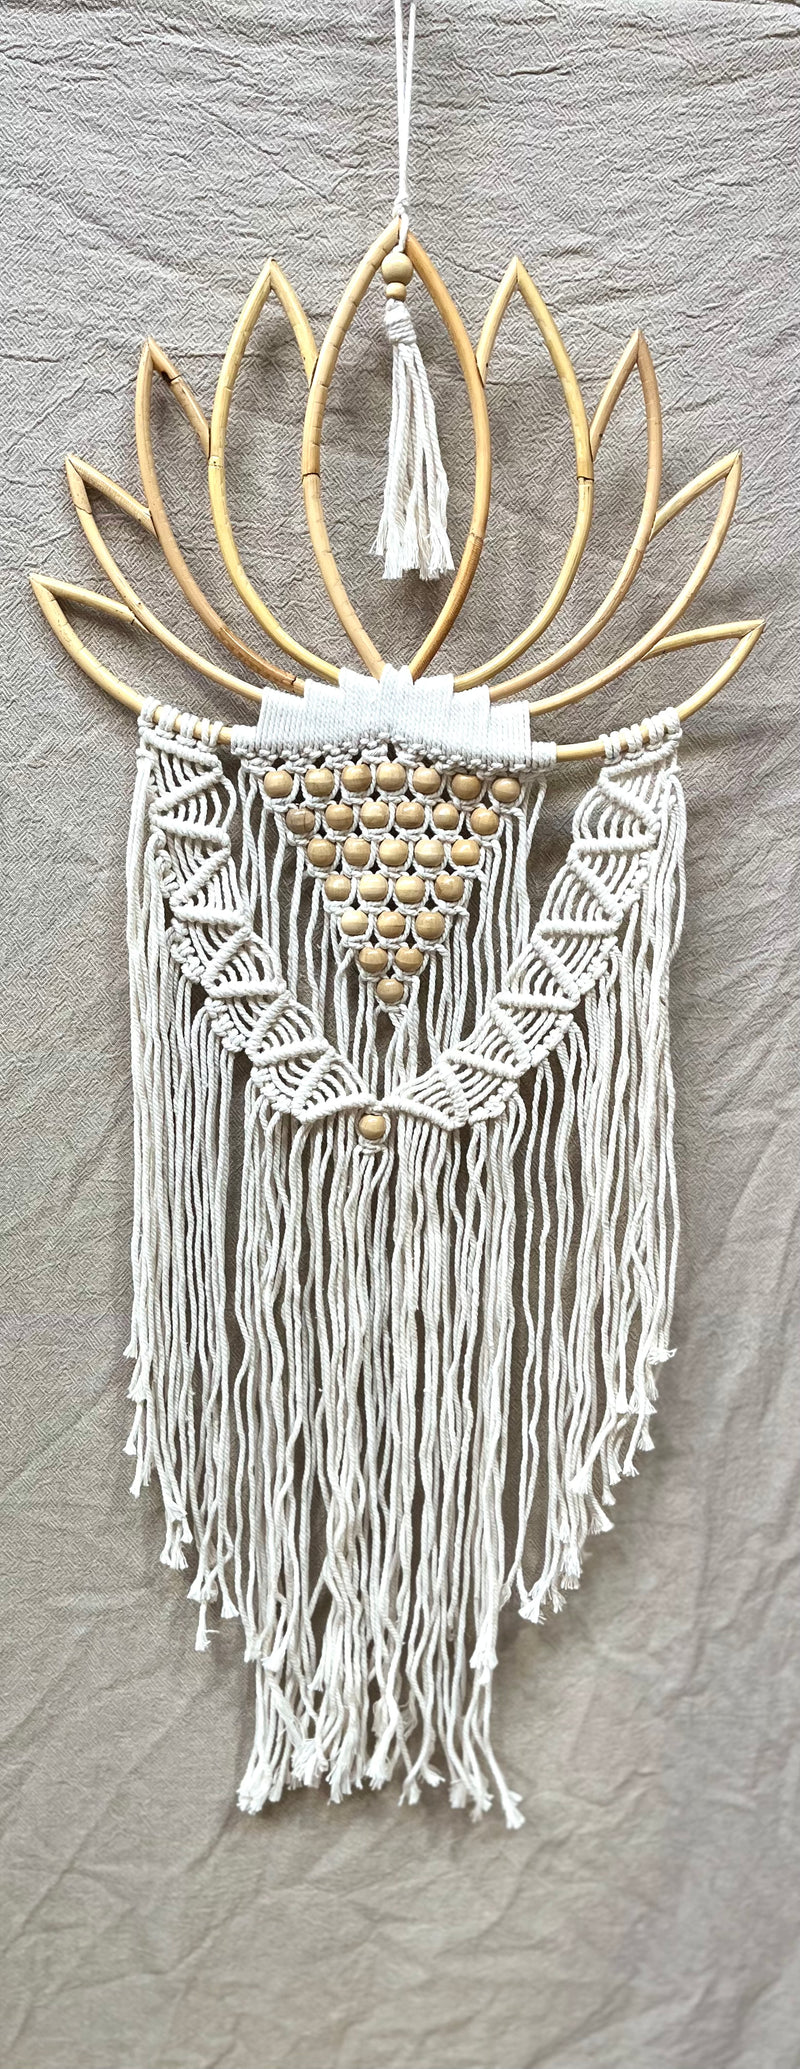 Lotus wall hanging / dream catcher with macrame and beads